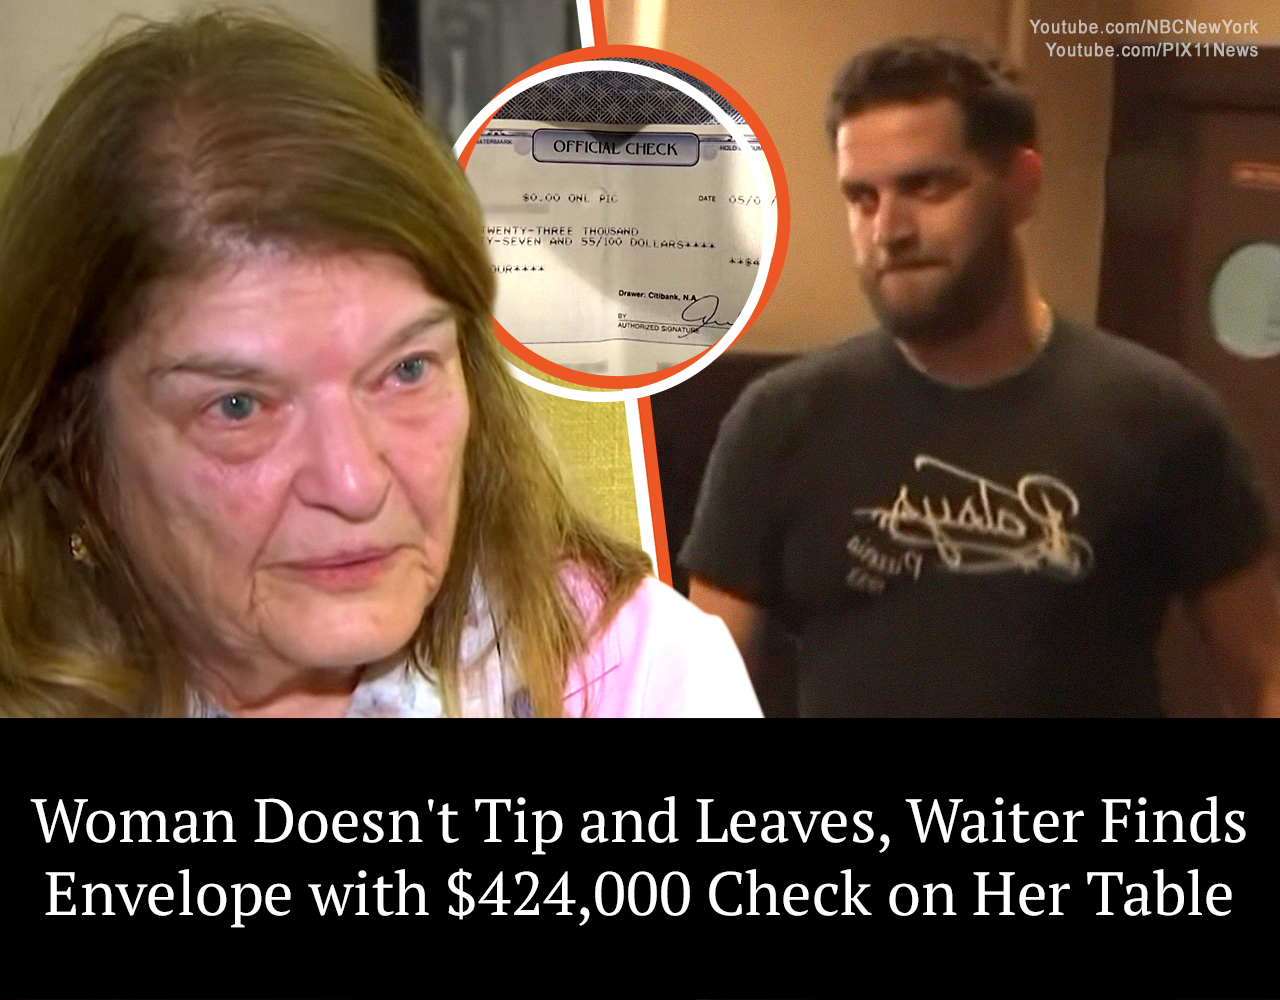 Woman Doesn’t Tip and Leaves, Waiter Finds Envelope with $424,000 Check on Her Table